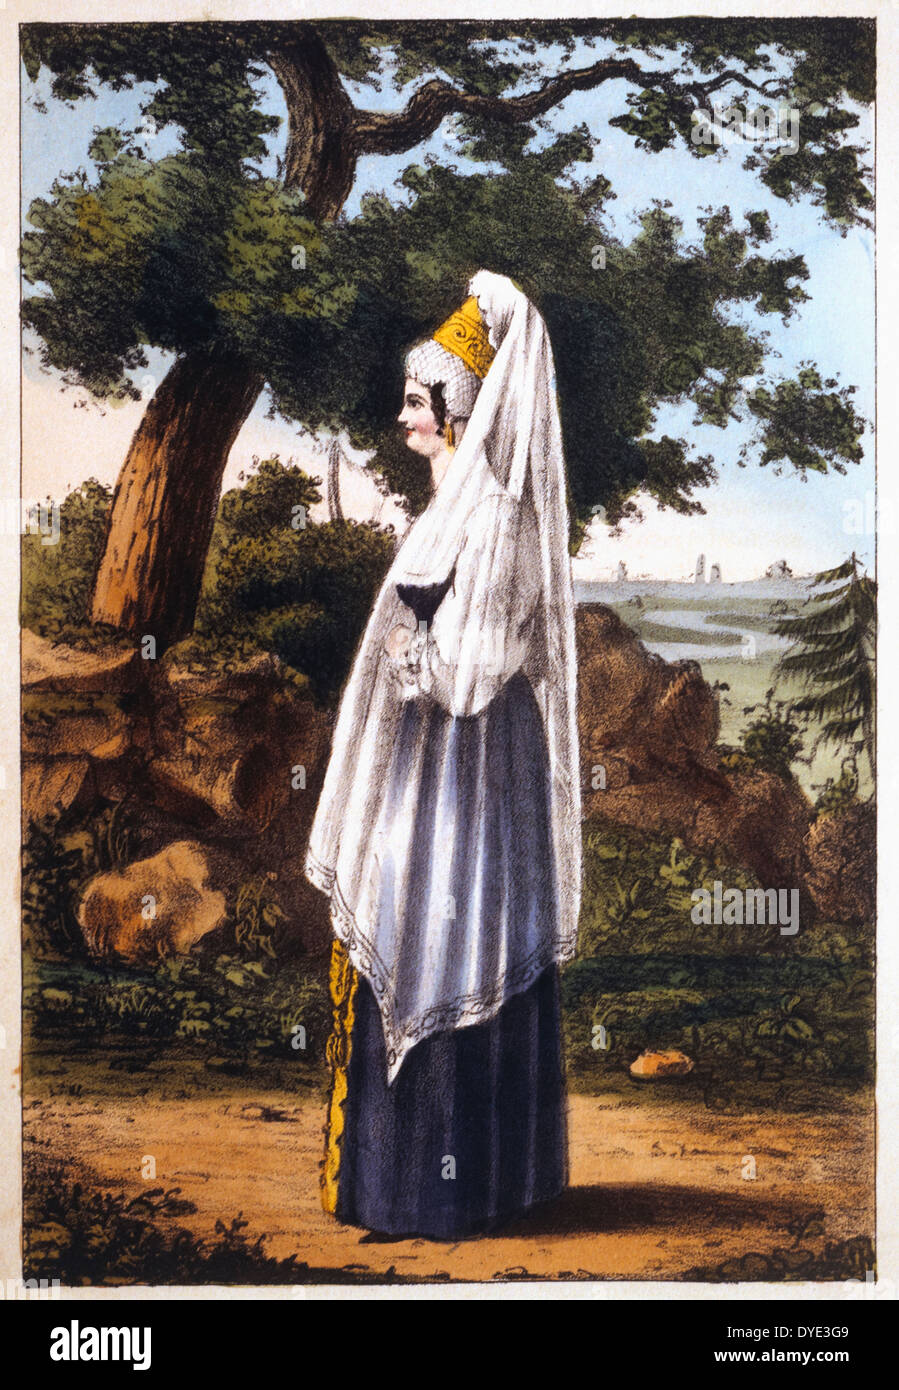 Merchant's Wife, or Kuptschiha, from Pinkerton's Russia, Hand-Colored Engraving, 1833 Stock Photo